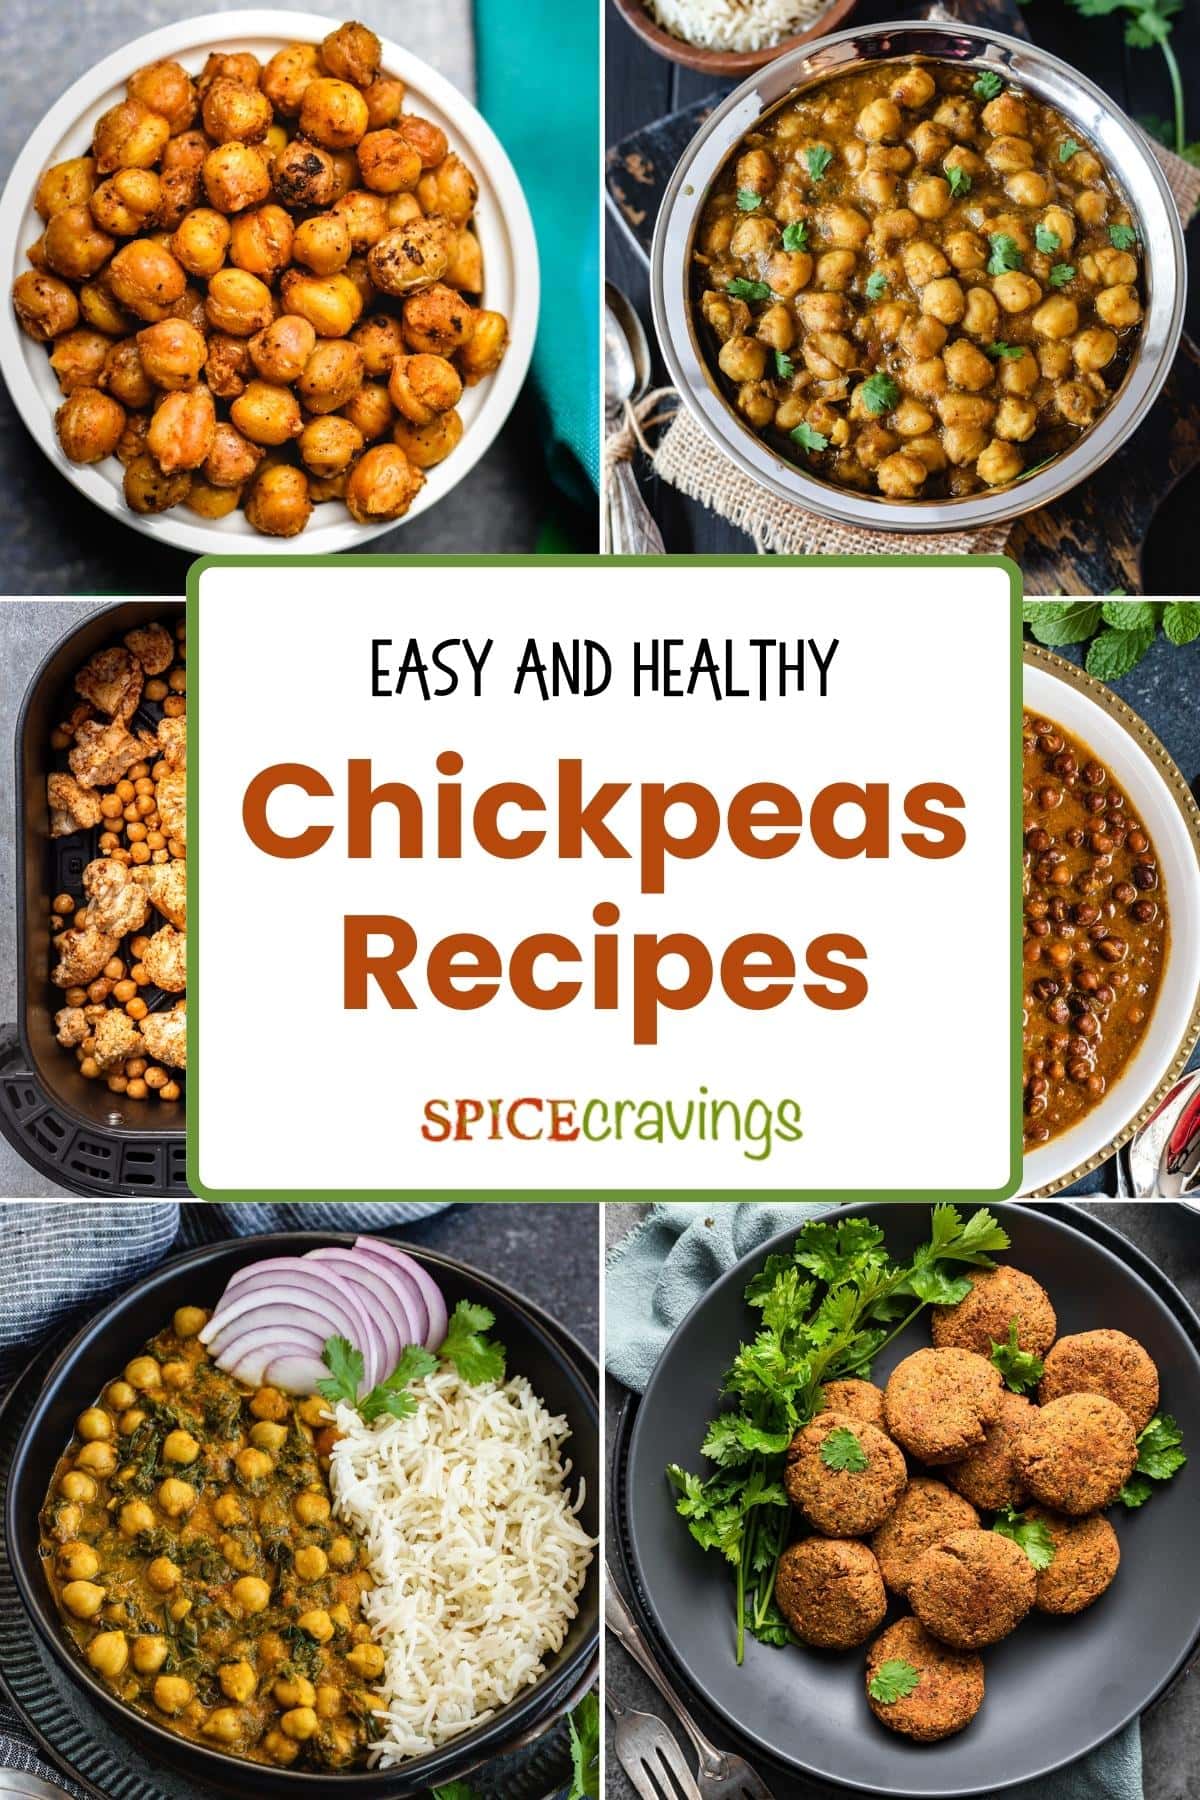 6-image collage of recipes with chickpeas